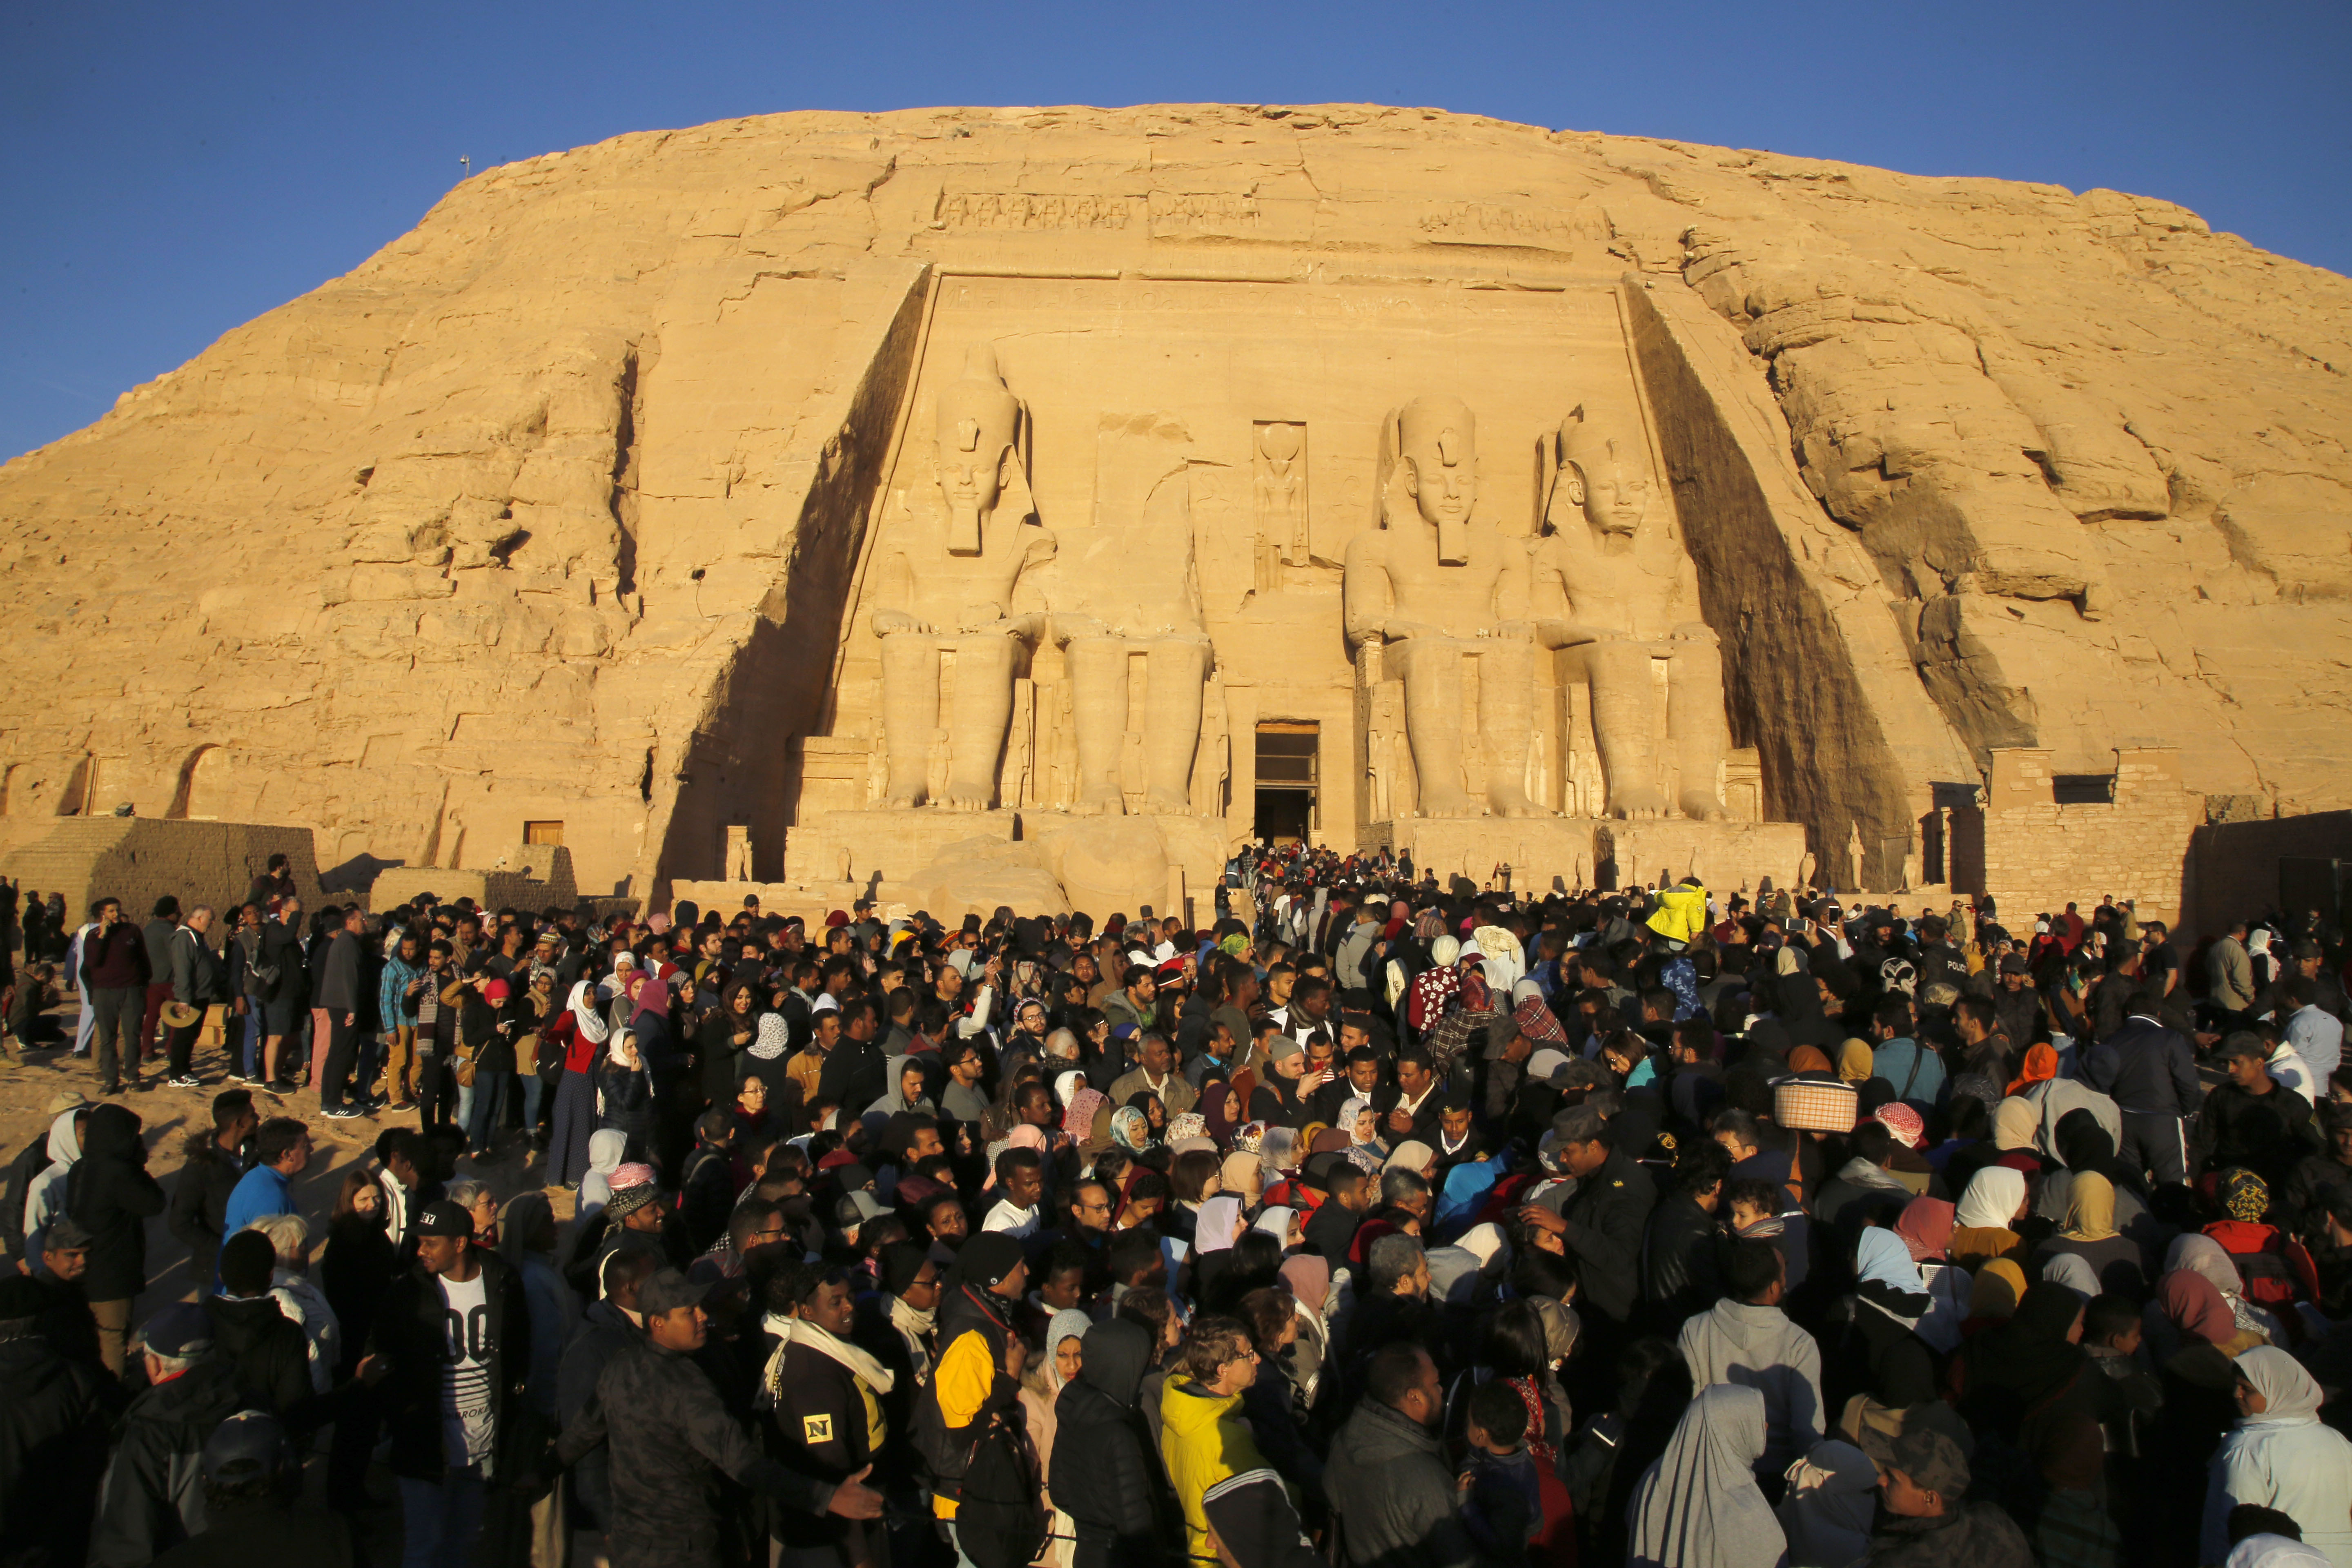 Thousands of visitors line up to visit the Great Temple of Ramses II, to observe the sun to send a beam of light into the ancient temple's dark inner chamber for over ten minutes in Abu Simbel, 870 kilometers (540 miles) south of Cairo, Egypt, Friday, Feb. 22, 2019. Thousands of people visited the temple to watch the sun illuminate colossal statues, a rare 3,200-year-old astronomical ceremony that happens twice a year. (AP Photo/Amr Nabil)